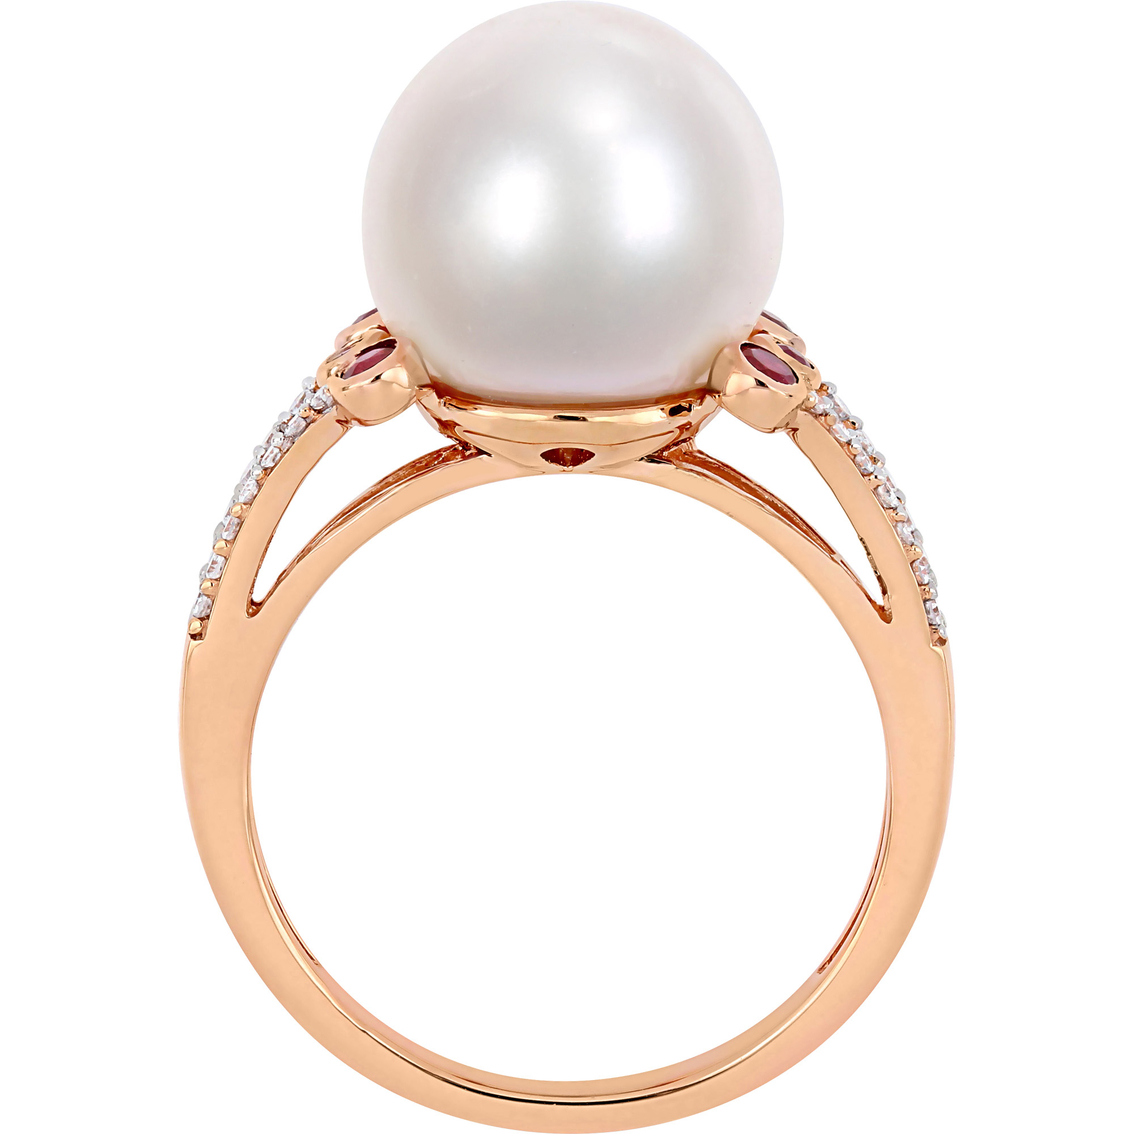 Michiko 10K Rose Gold 1/7 CTW Diamond Cultured Pearl and Ruby Split Shank Ring - Image 3 of 4